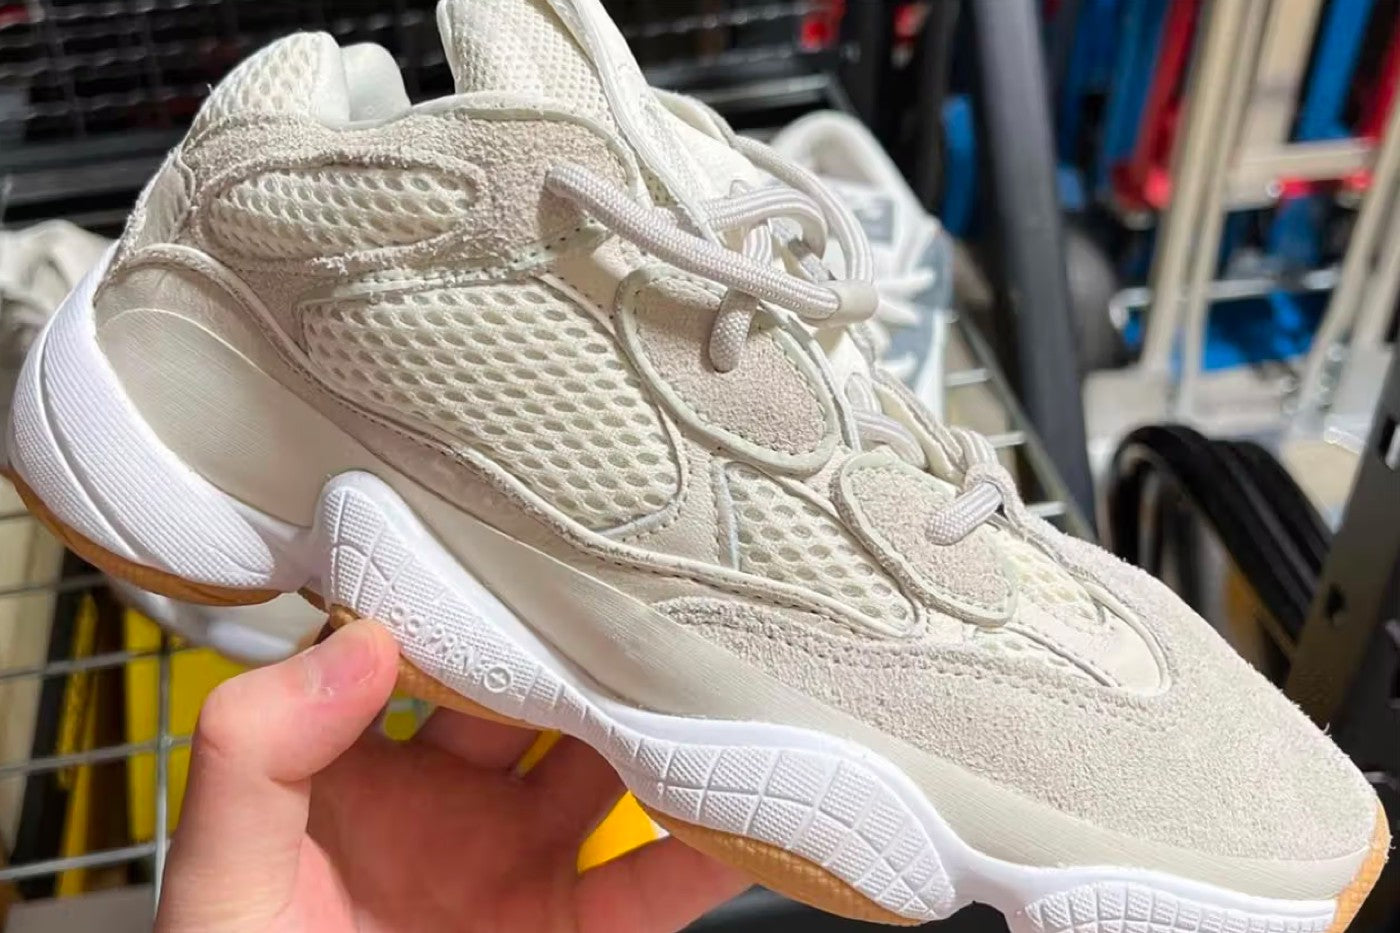 Could This Be the First Non-Yeezy adidas 500?